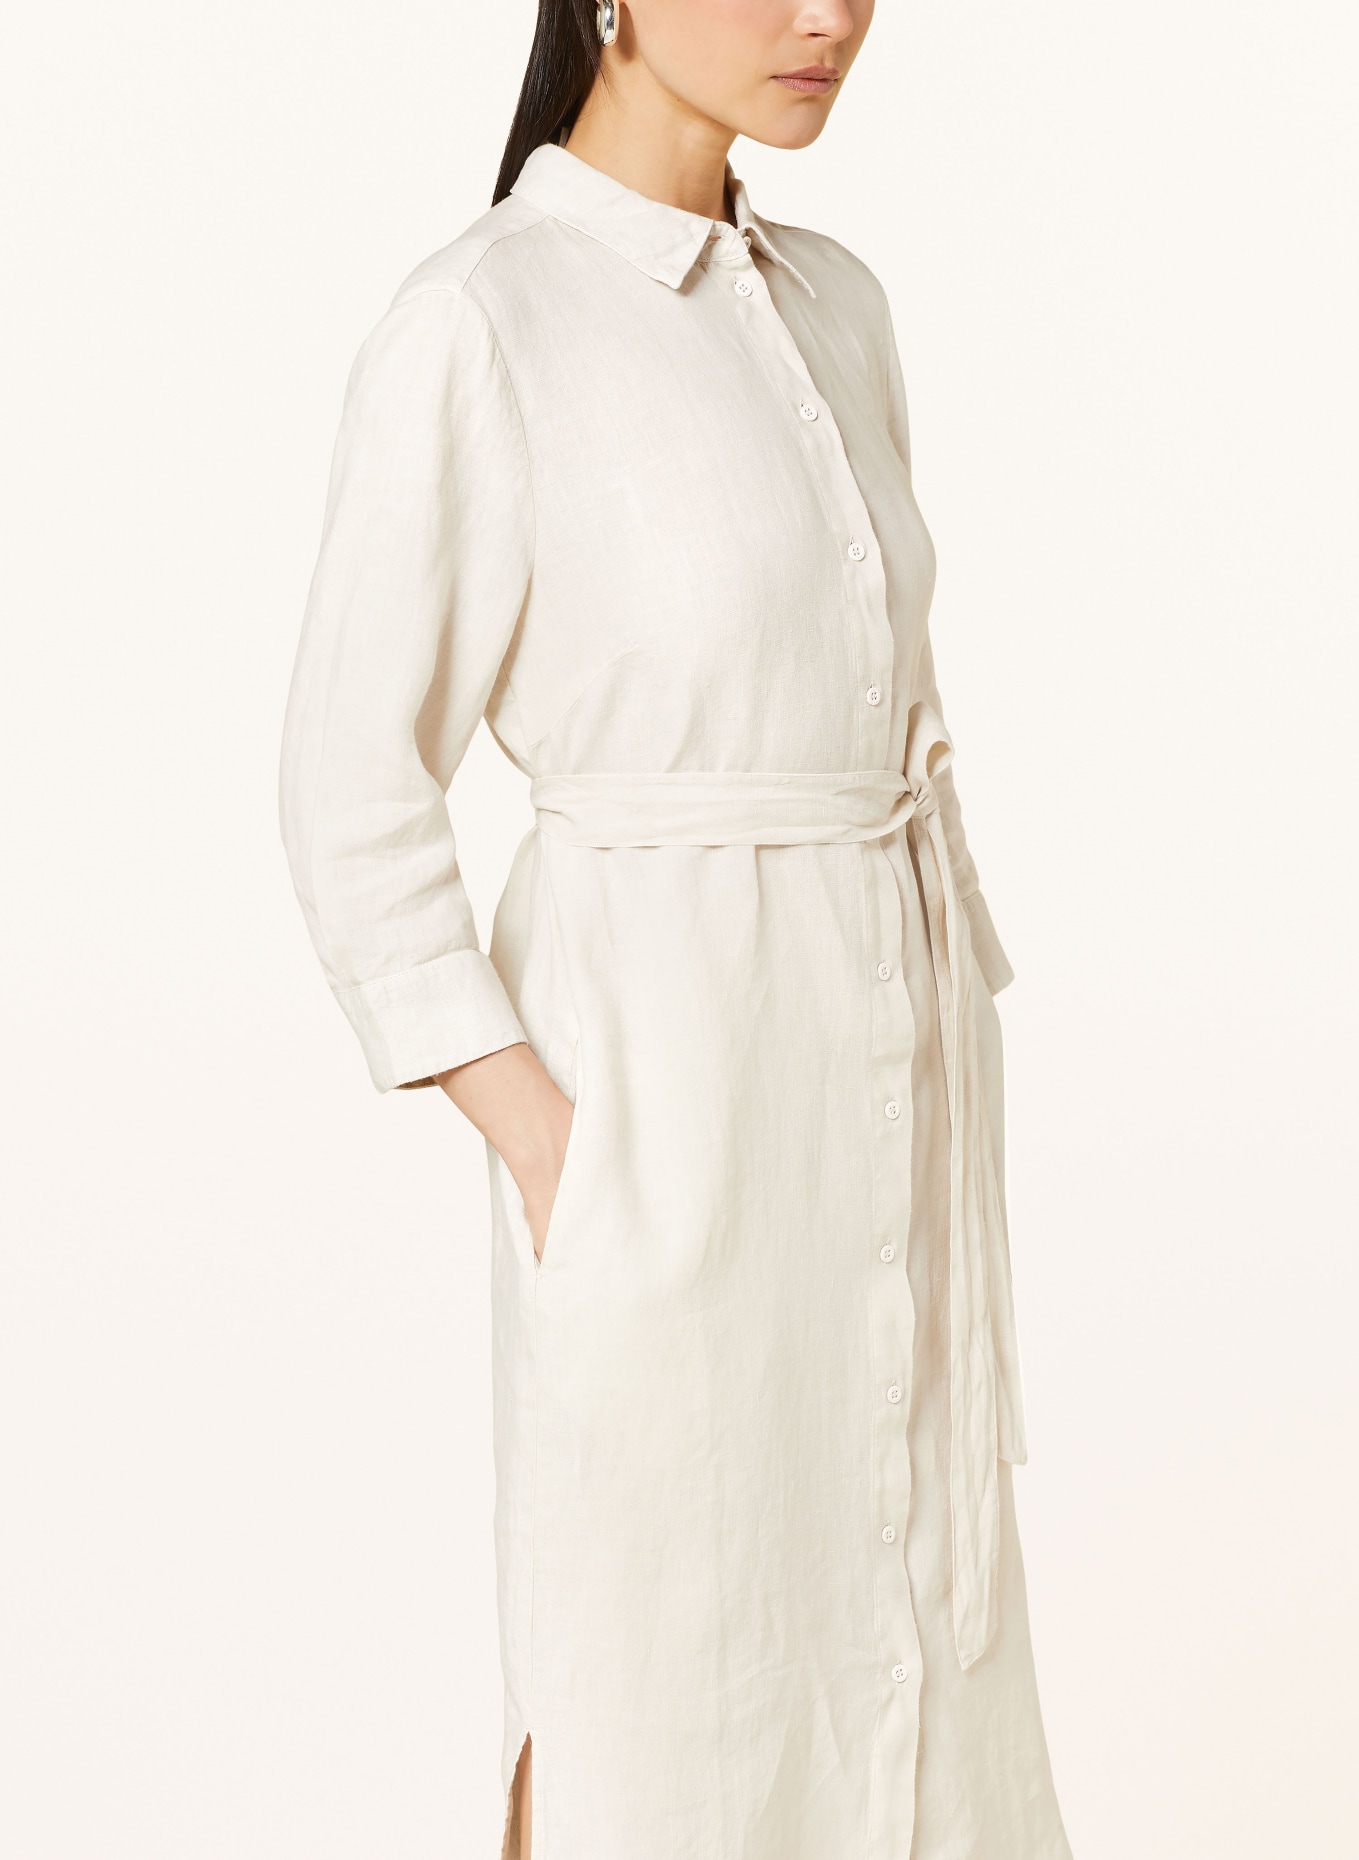 oui Shirt dress made of linen with 3/4 sleeves, Color: CREAM (Image 4)